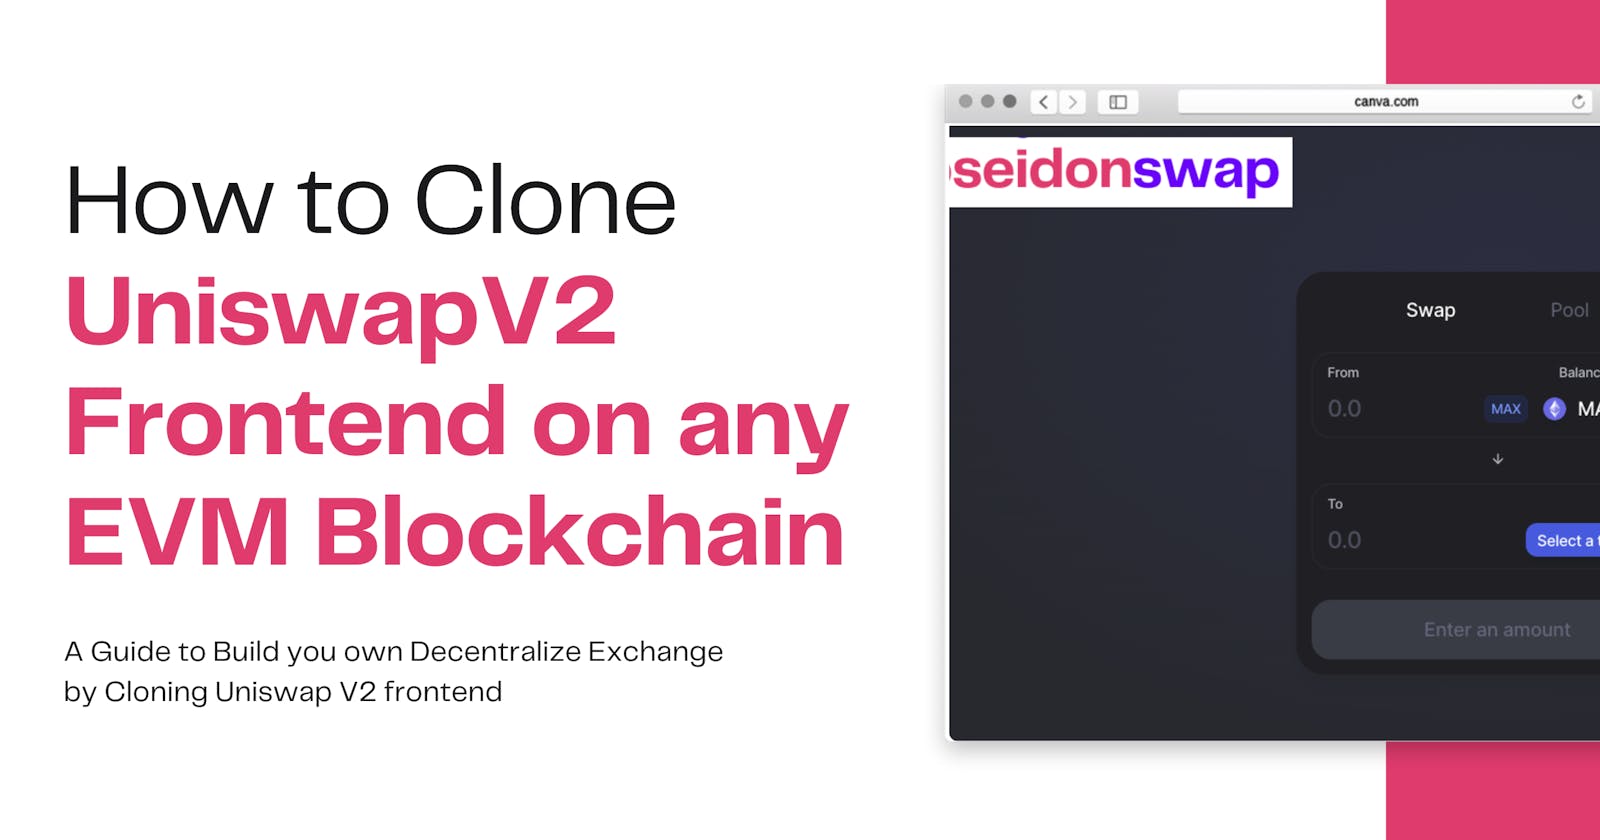 Build your own Decentralize Exchange - Clone UniswapV2 Frontend